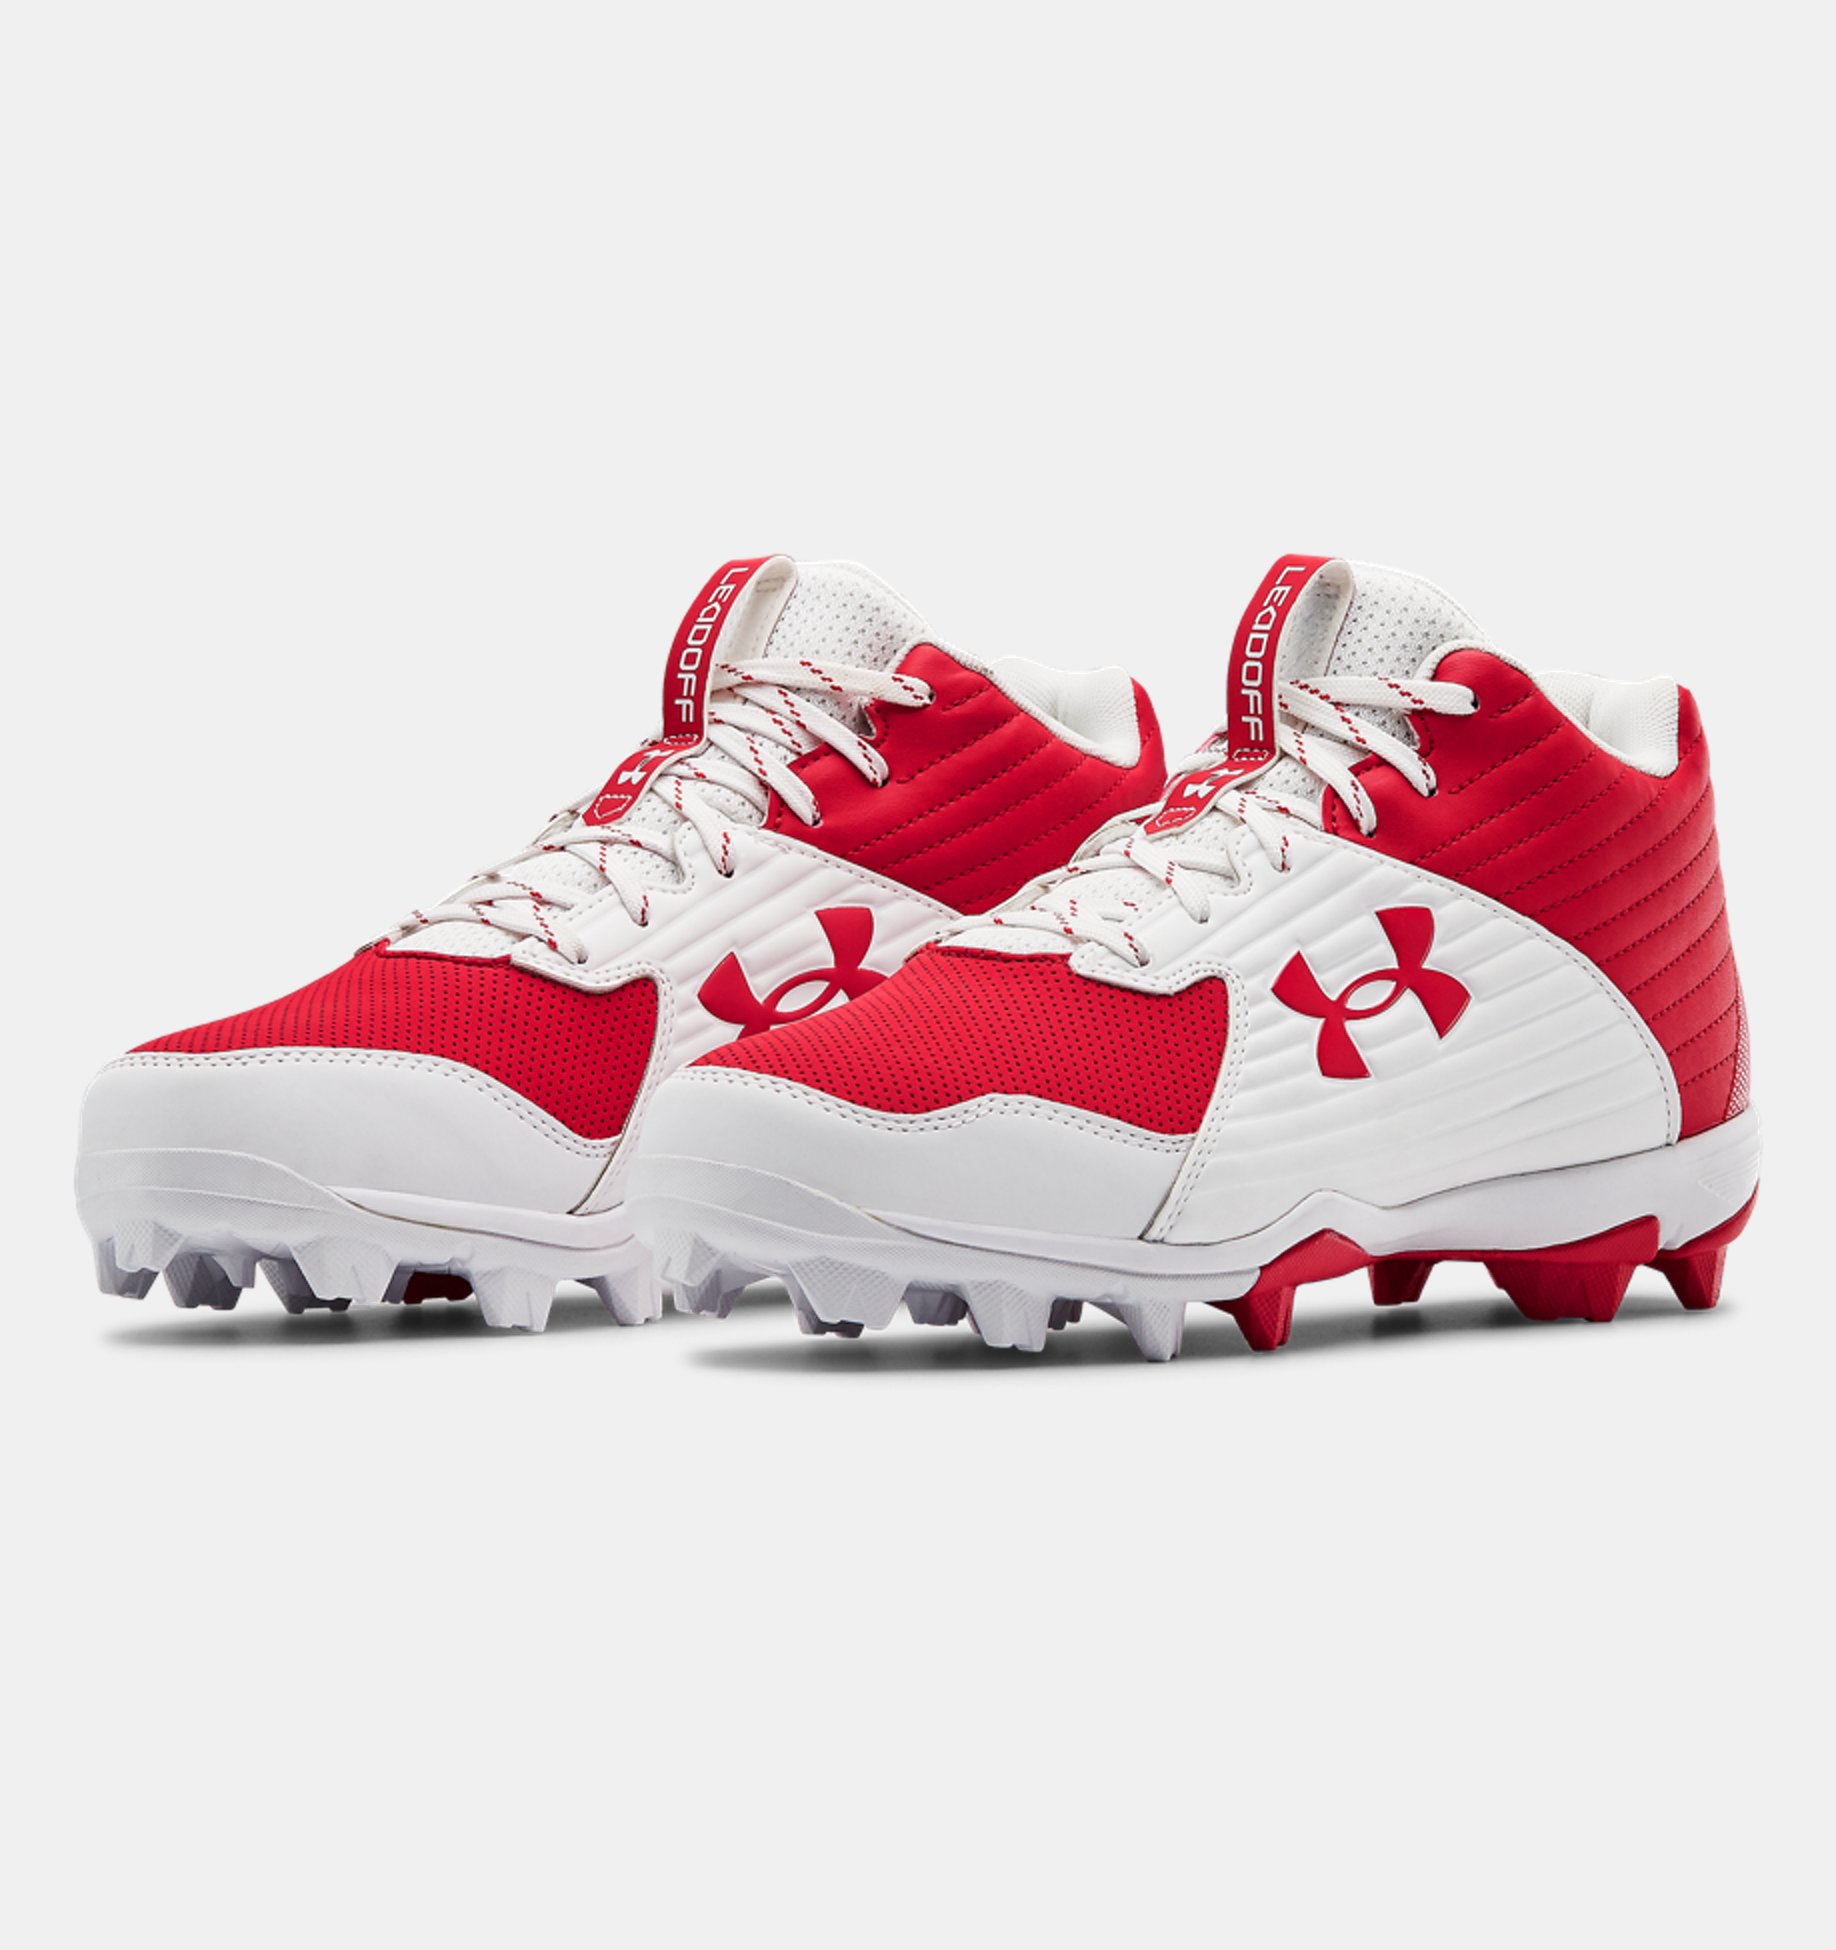 Under Armour Mens Leadoff Mid Rubber Molded Baseball Cleat Baseball Shoe 